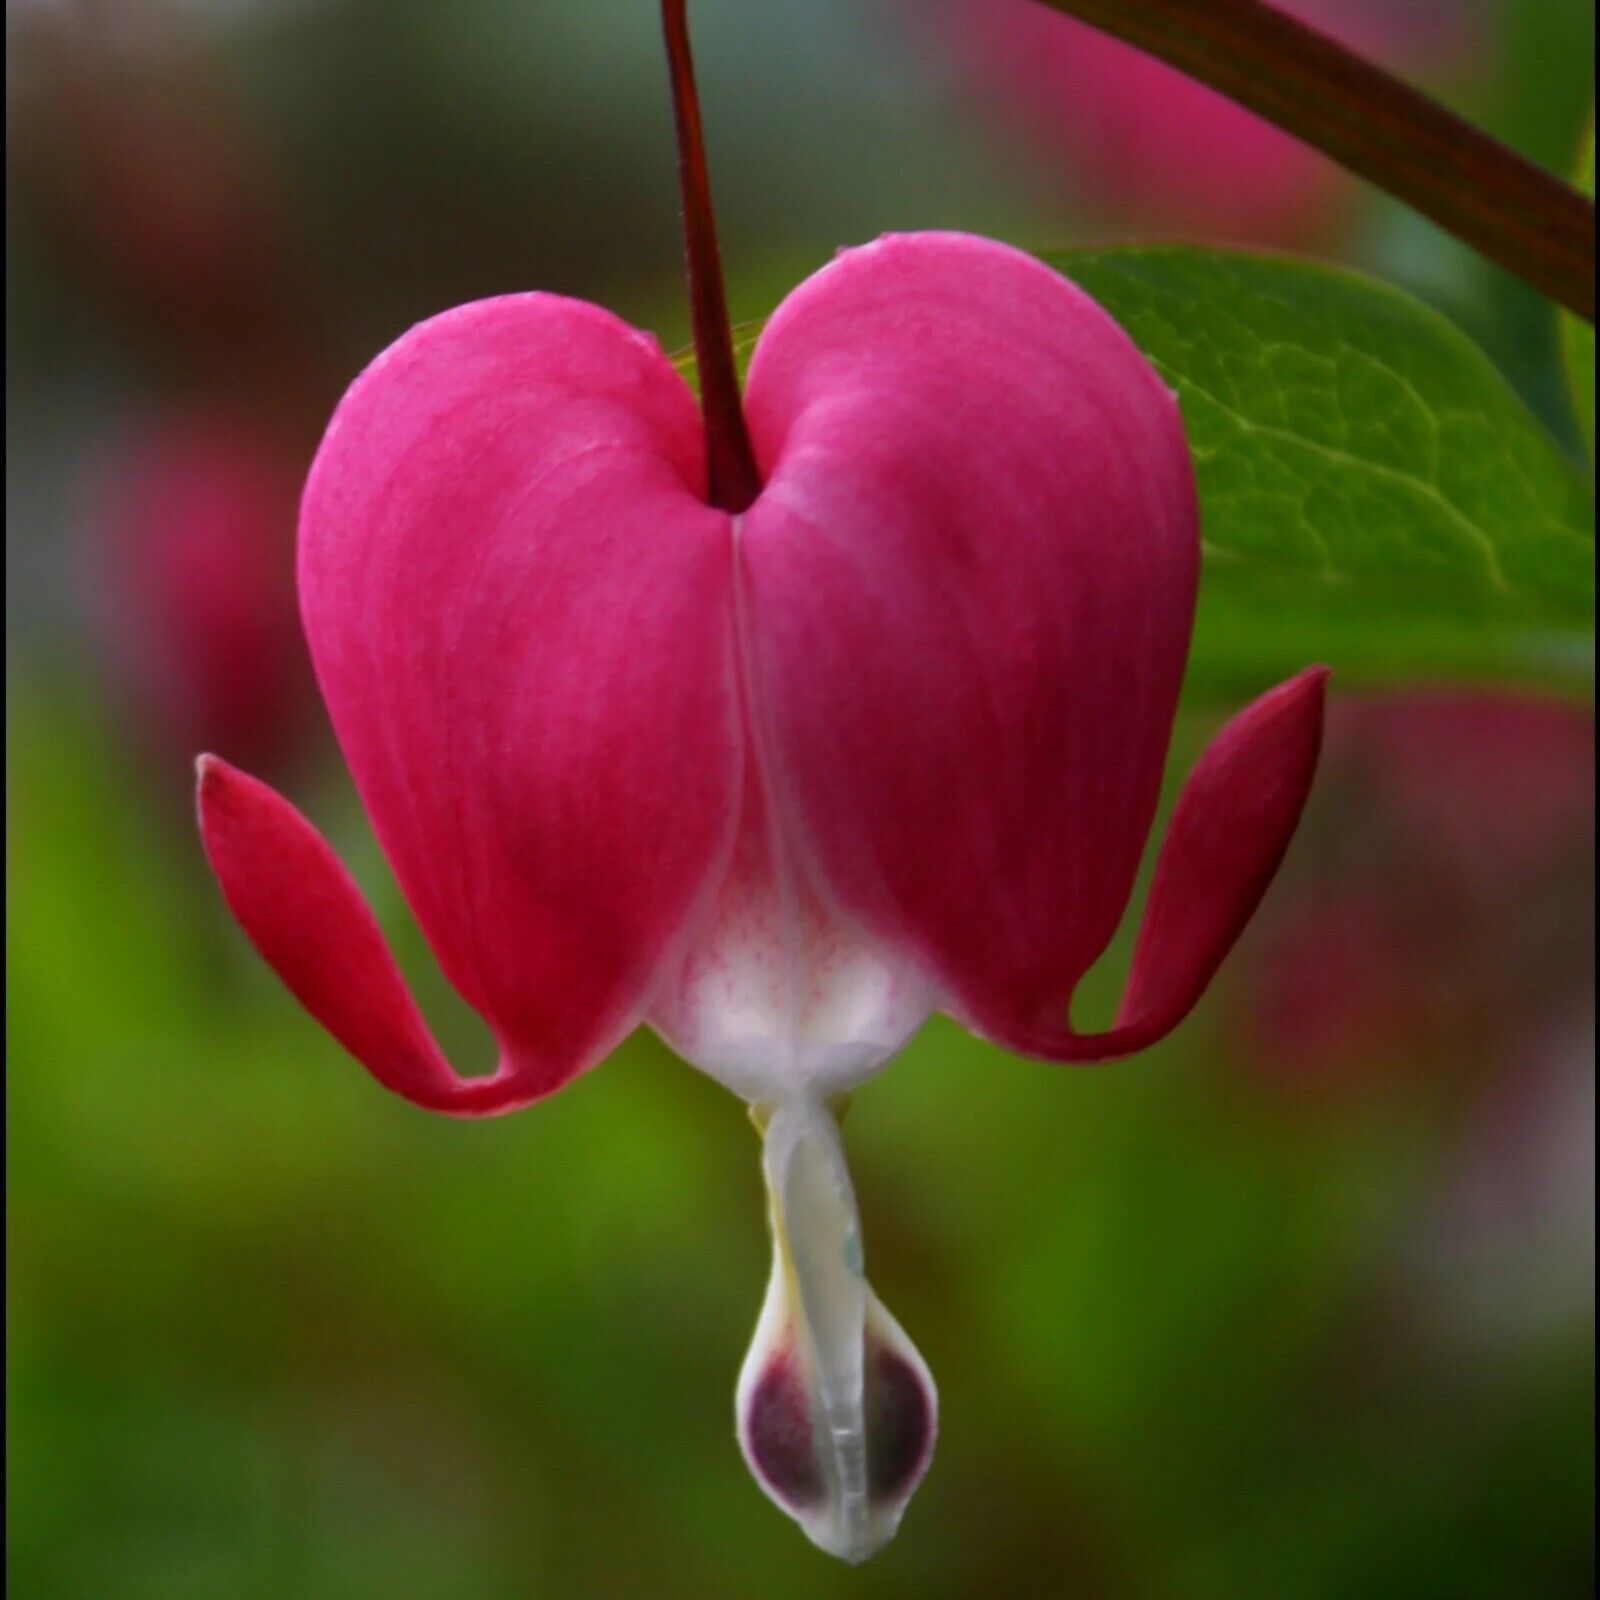 DICENTRA ~BLEEDING HEART~ PERENNIAL SHADE PLANTS ~PINK & WHITE~ PICK YOUR COLOR!